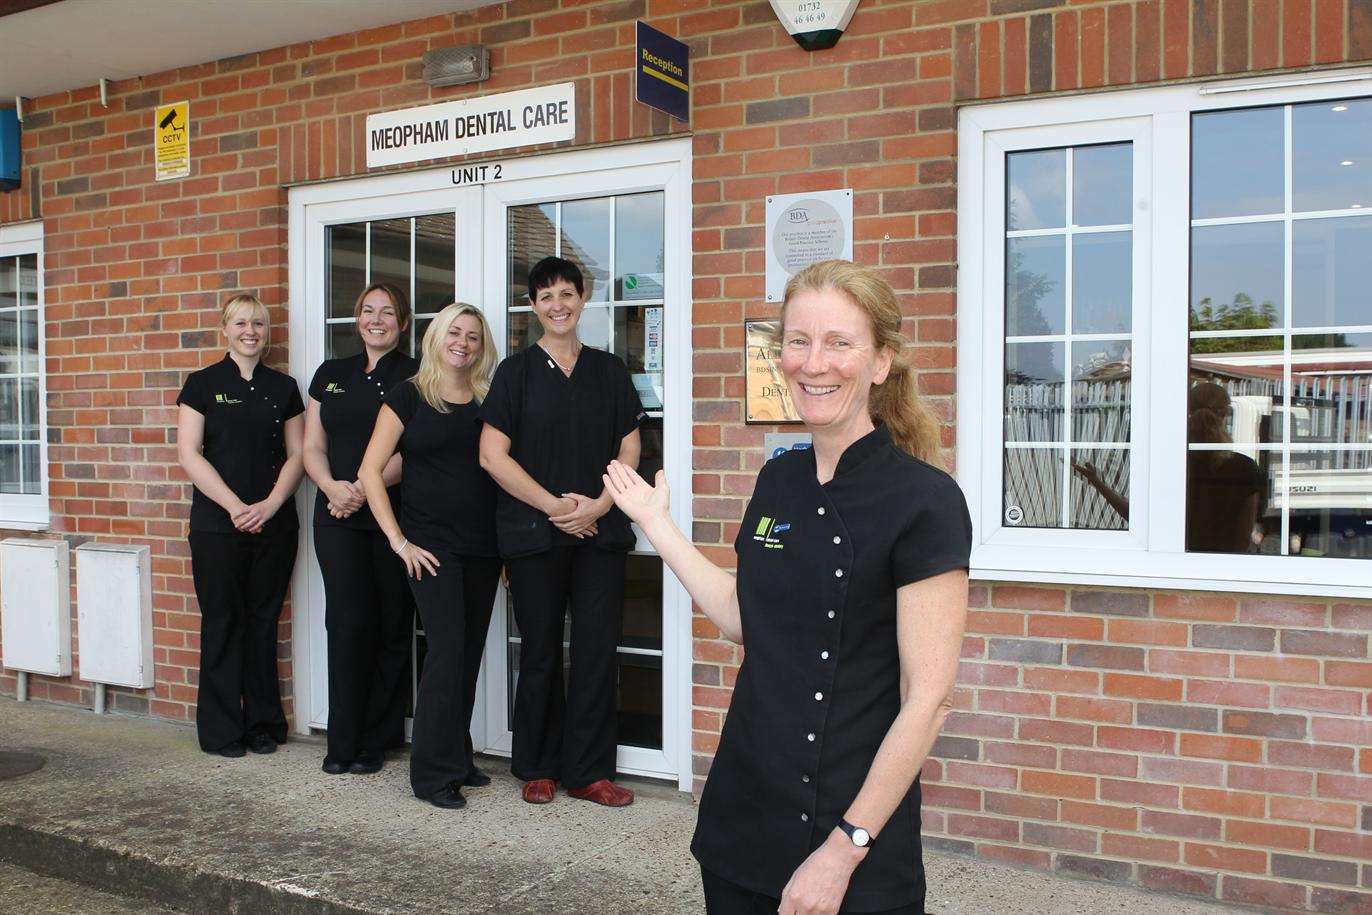 Owner Alison Mellor with staff at Meopham Dental Care